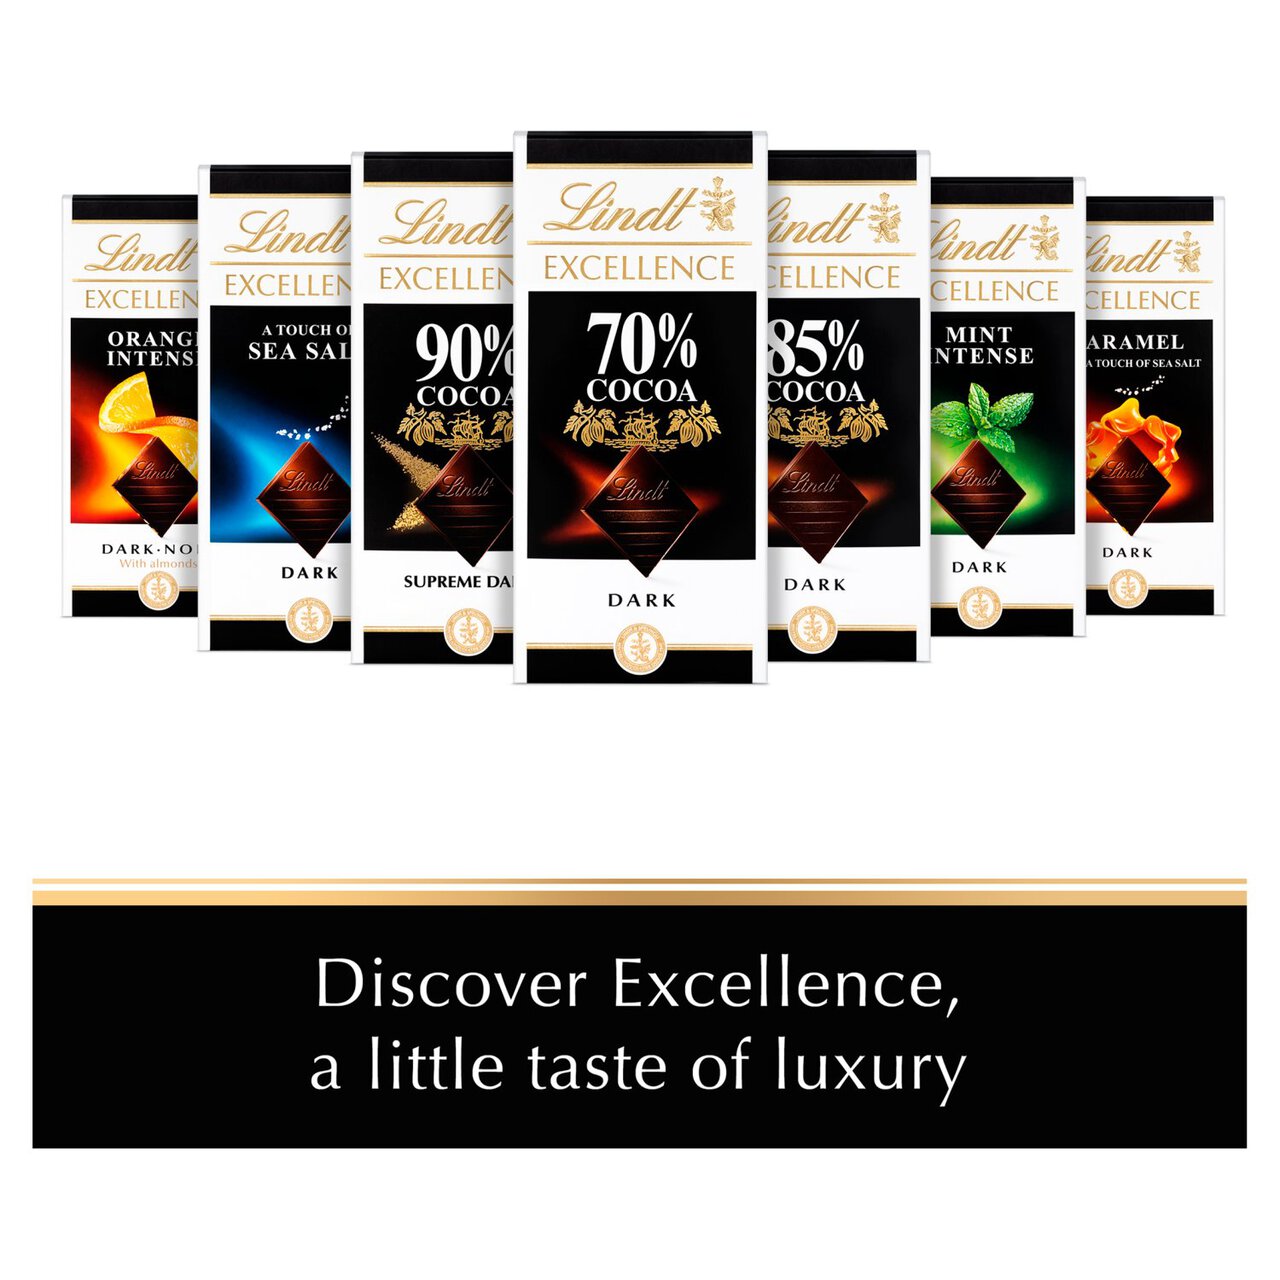 Lindt Excellence 70% Cocoa Dark Chocolate Bar 100g